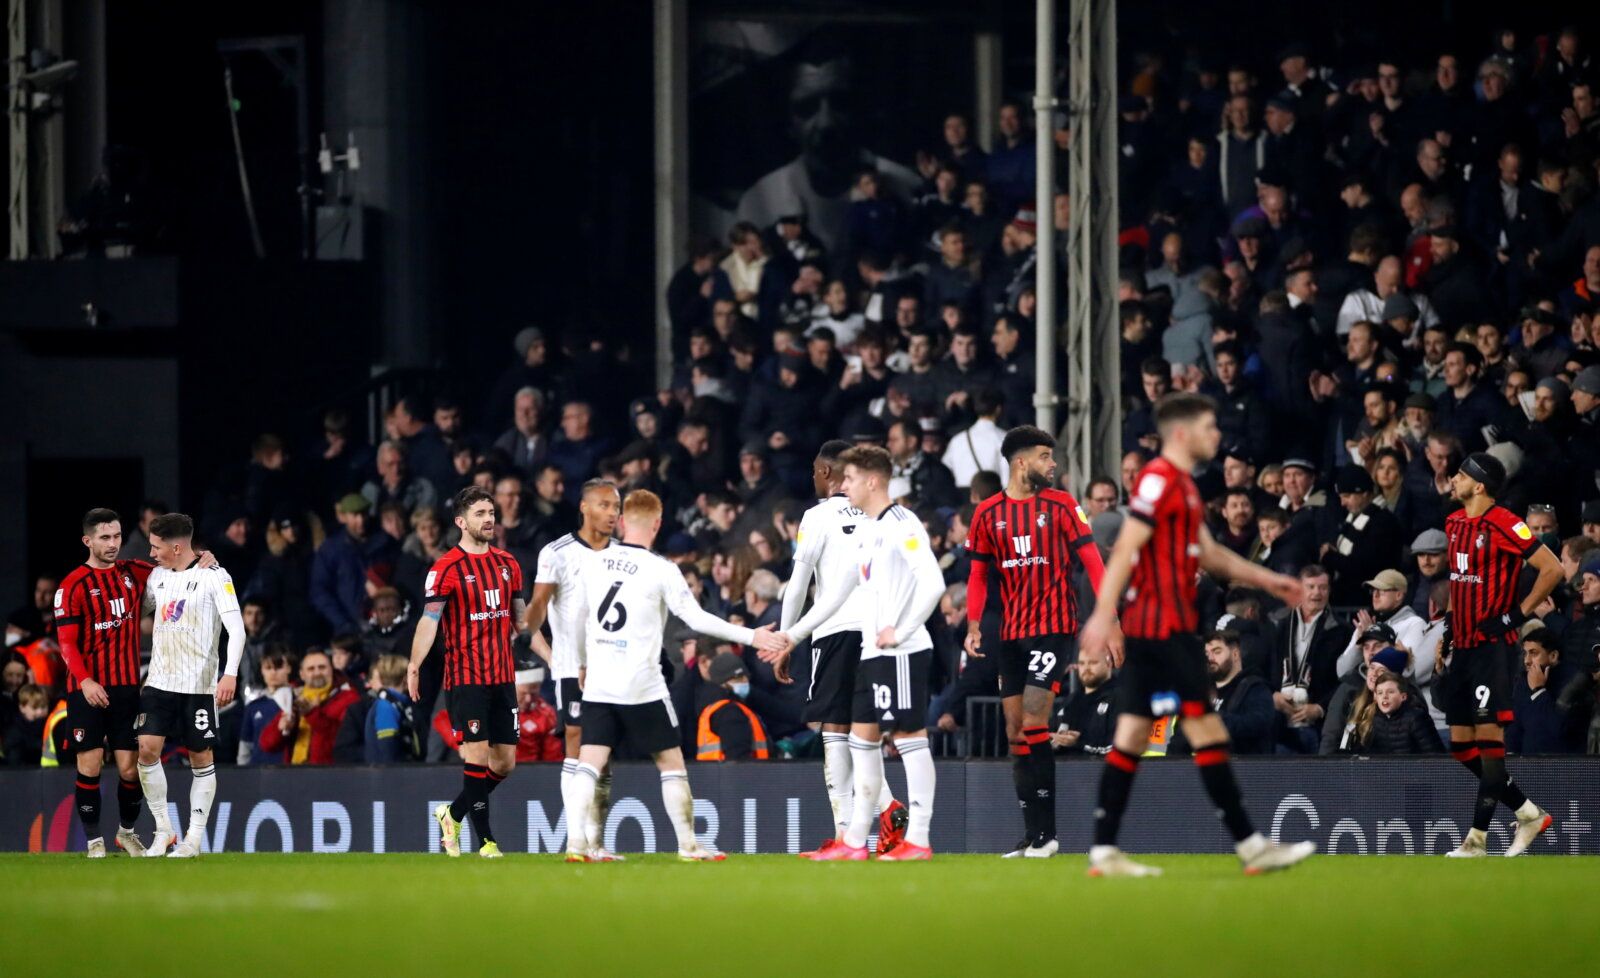 Soccer Football - Championship - Fulham v AFC Bournemouth - Craven Cottage, London, Britain - December 3, 2021 Players shake hands at the end of the match Action Images/Andrew Boyers  EDITORIAL USE ONLY. No use with unauthorized audio, video, data, fixture lists, club/league logos or 